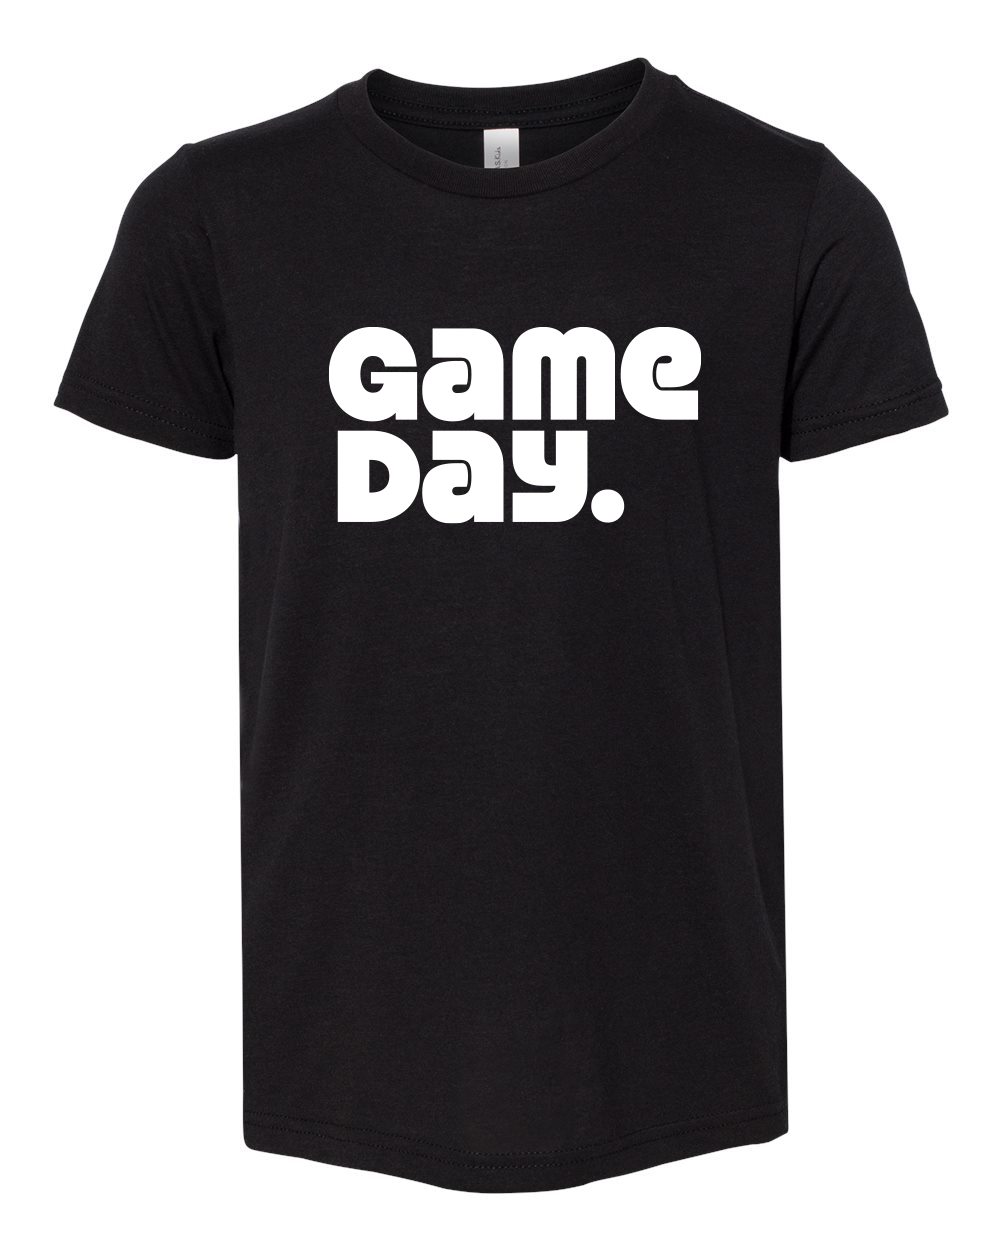 Graphic Tee - Game Day Black/White